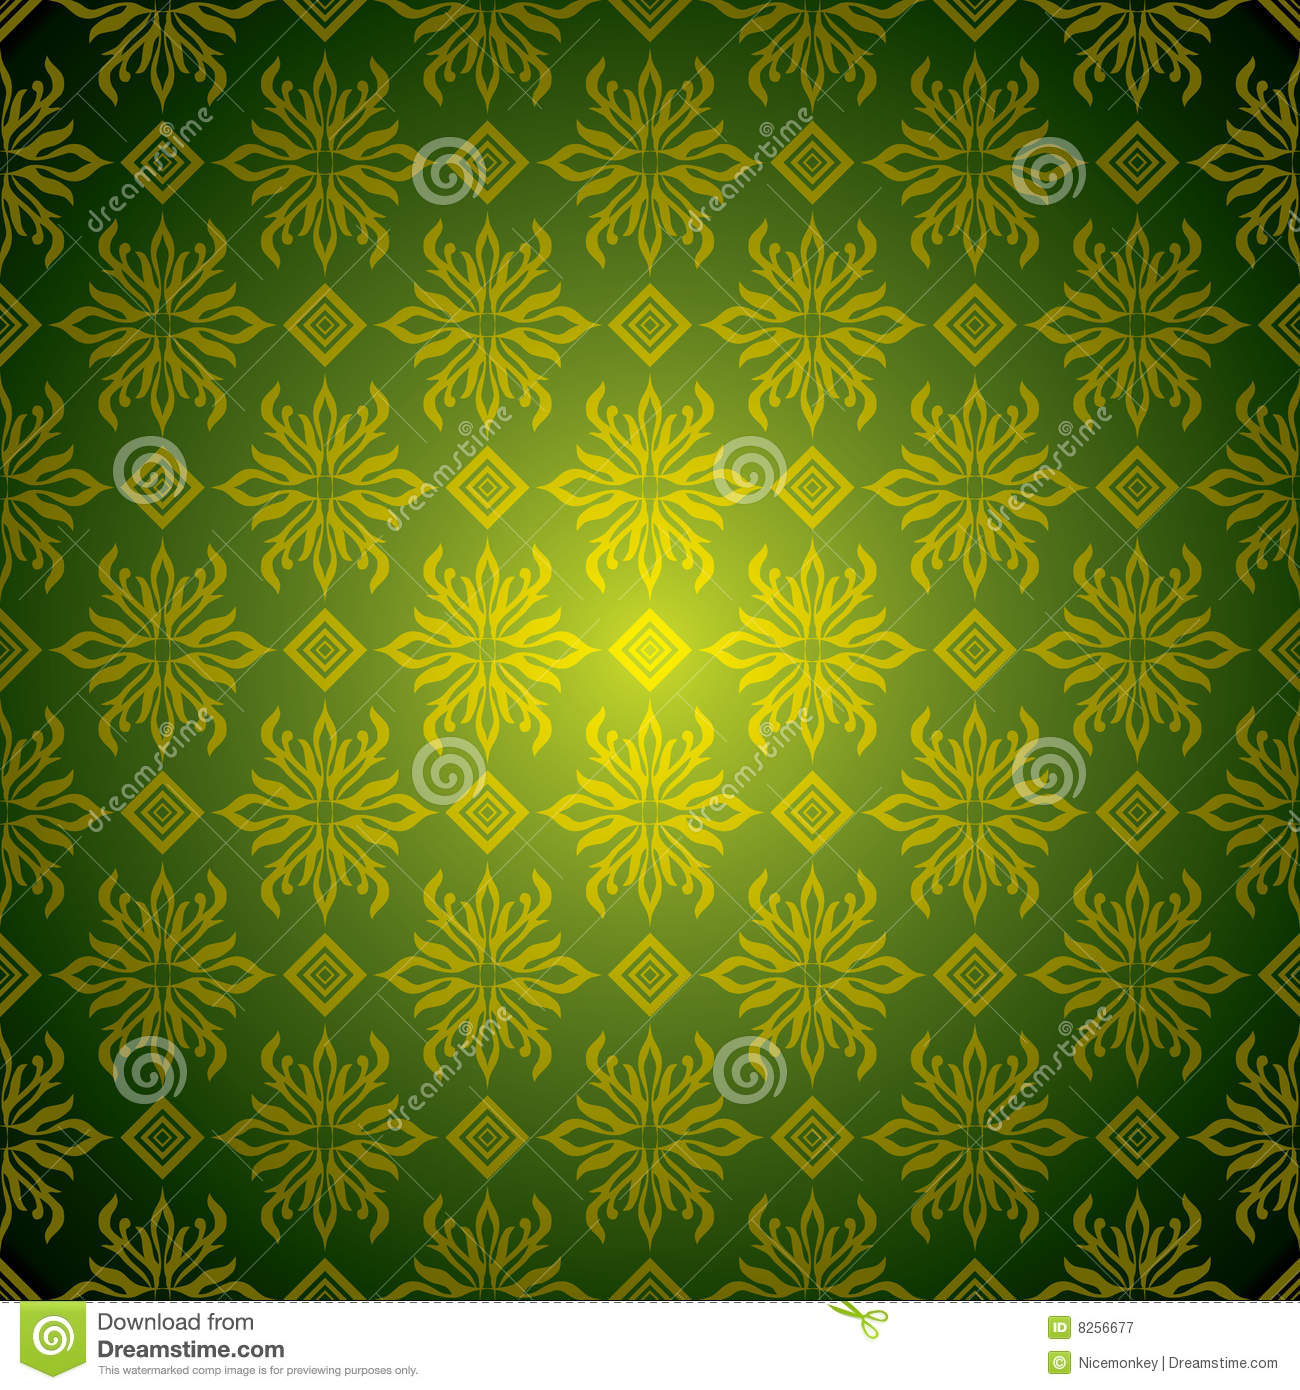 green and gold wallpaper #17